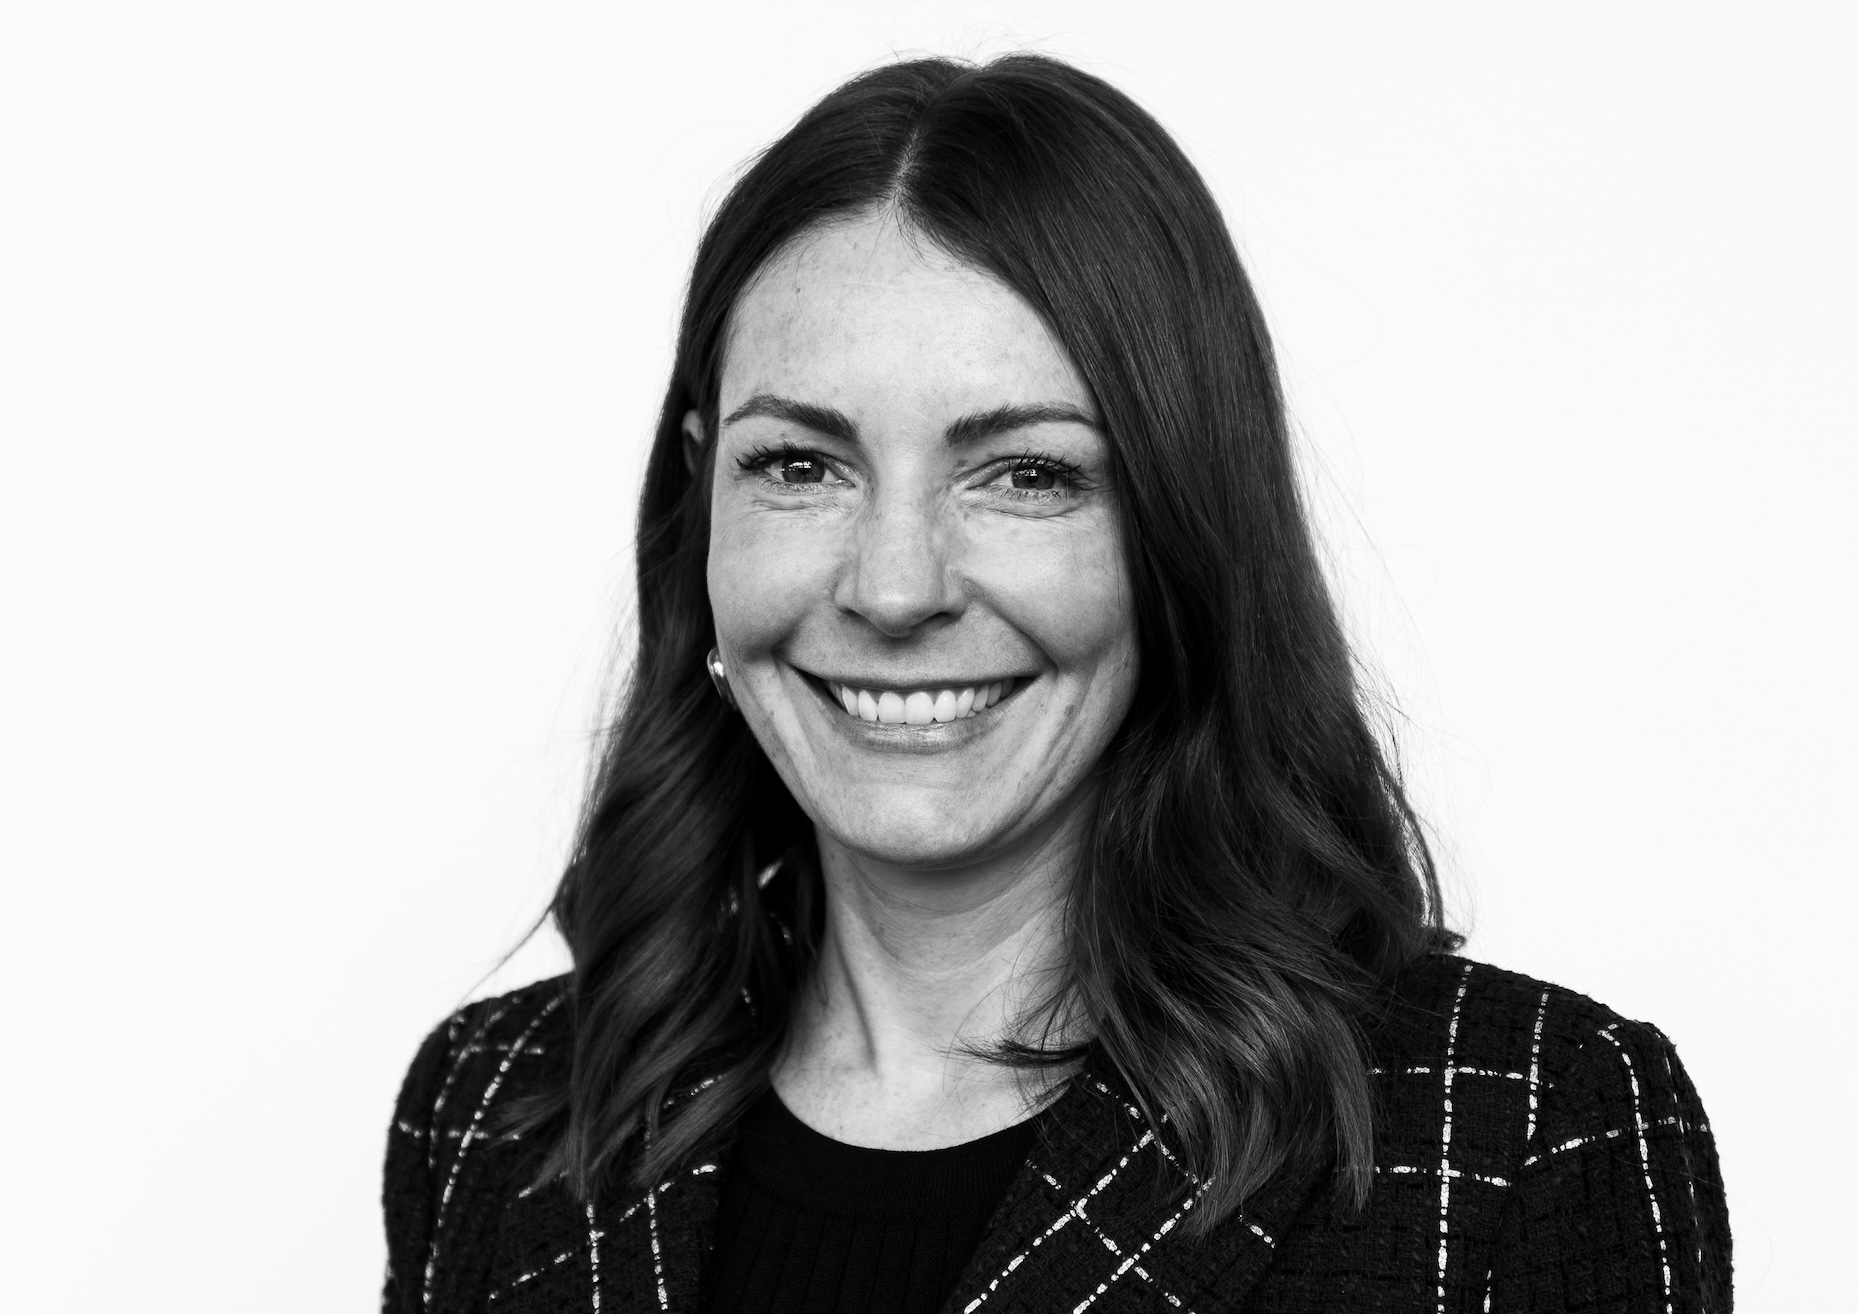 Jessica Allison departs Mango for general manager role at Herd MSL New Zealand